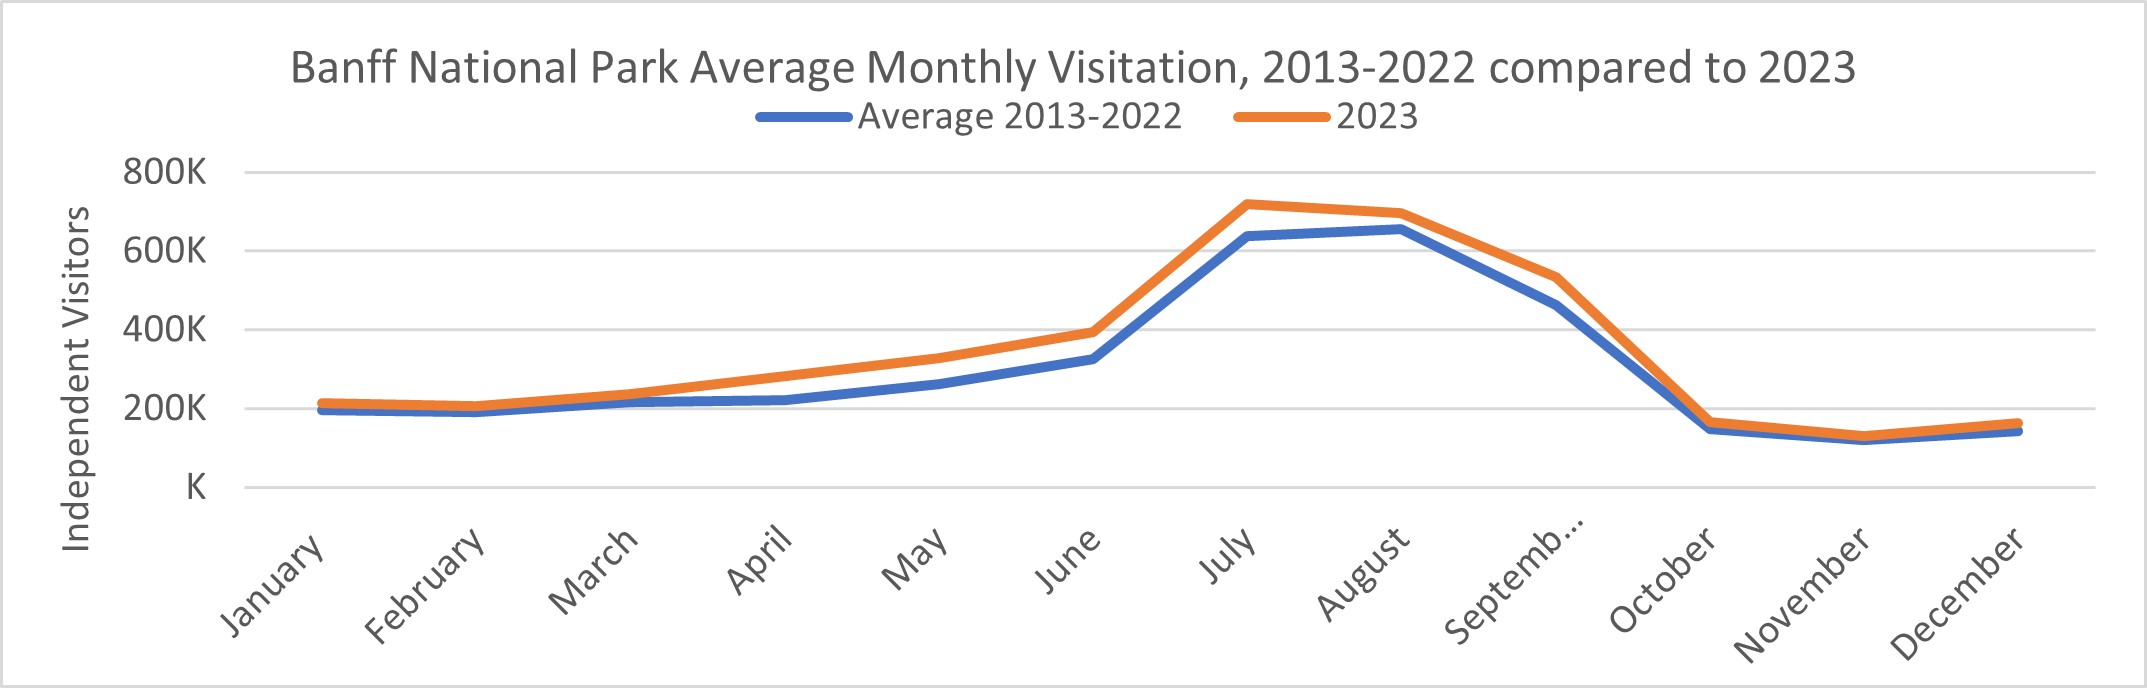 Graphic of Banff National Park Average Monthly Visitation, 2013-2022 compared to 2023. More details provided in the text version below. 